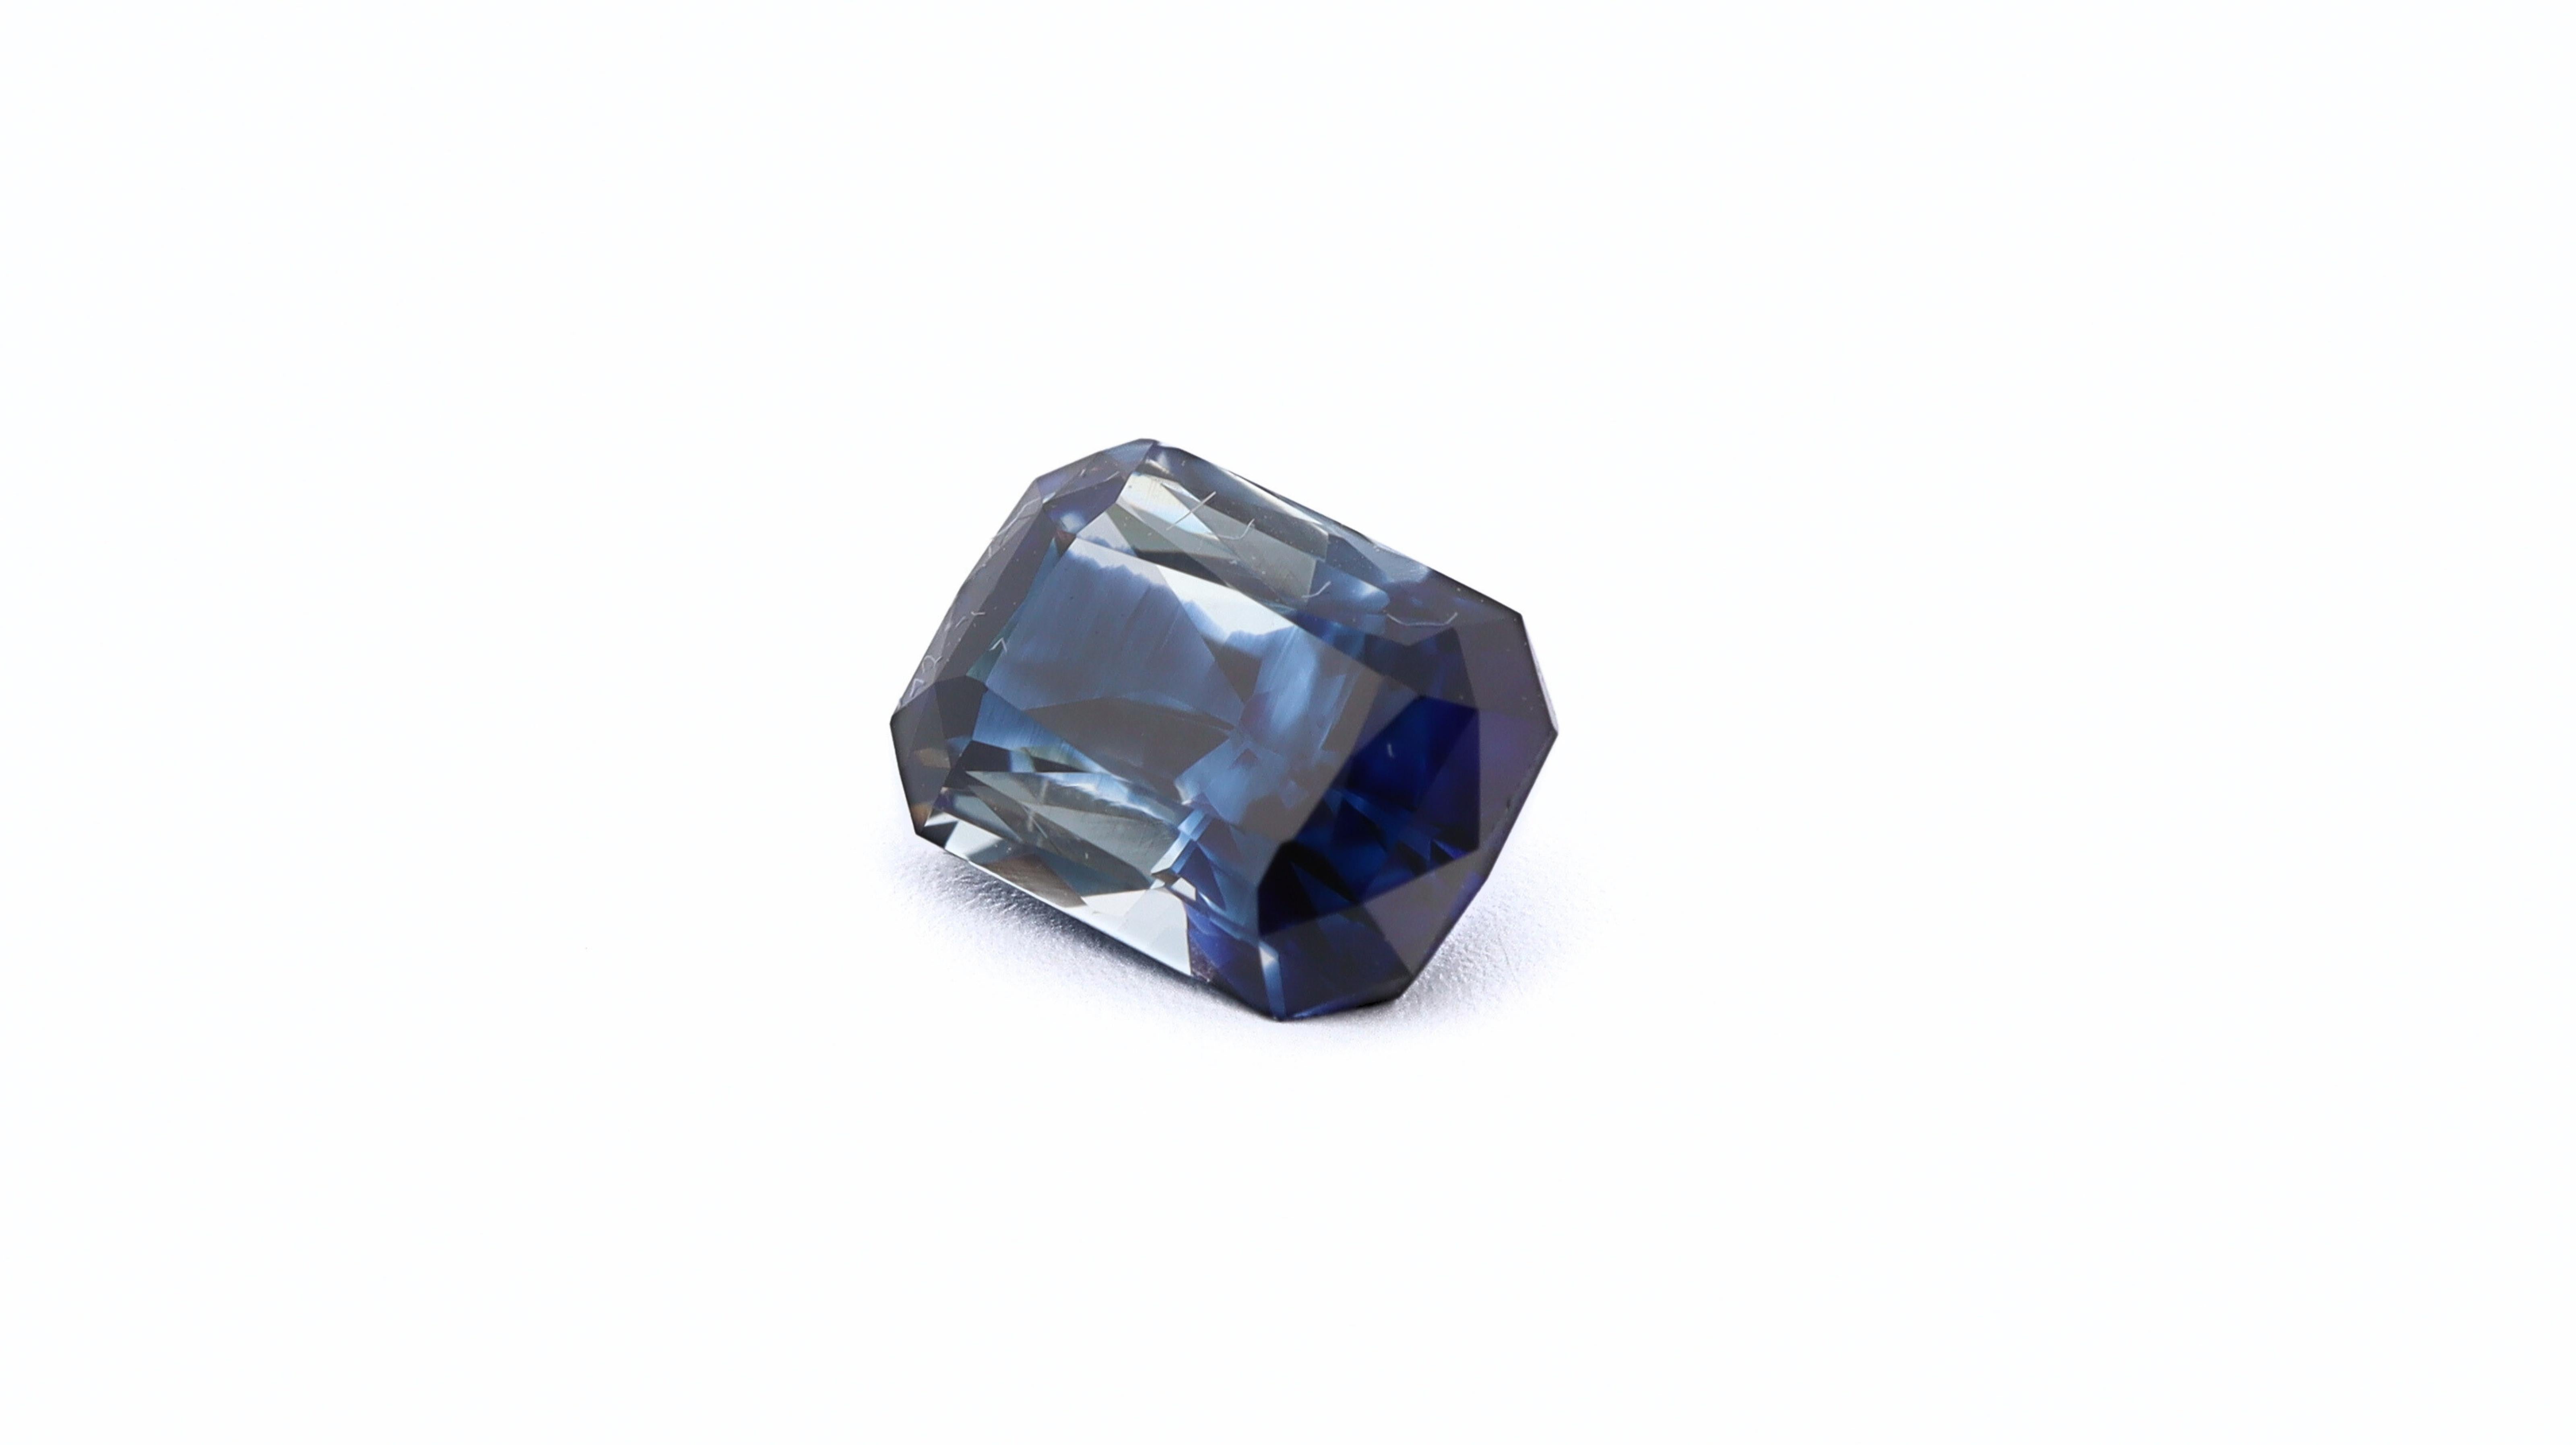 This is part of our private collection, and it is a rare collectible natural Sapphire that will be an important addition to any collector, or the main gemstone of an exclusive piece of jewelry.

It boats an unique bi-color / color zoning with blue